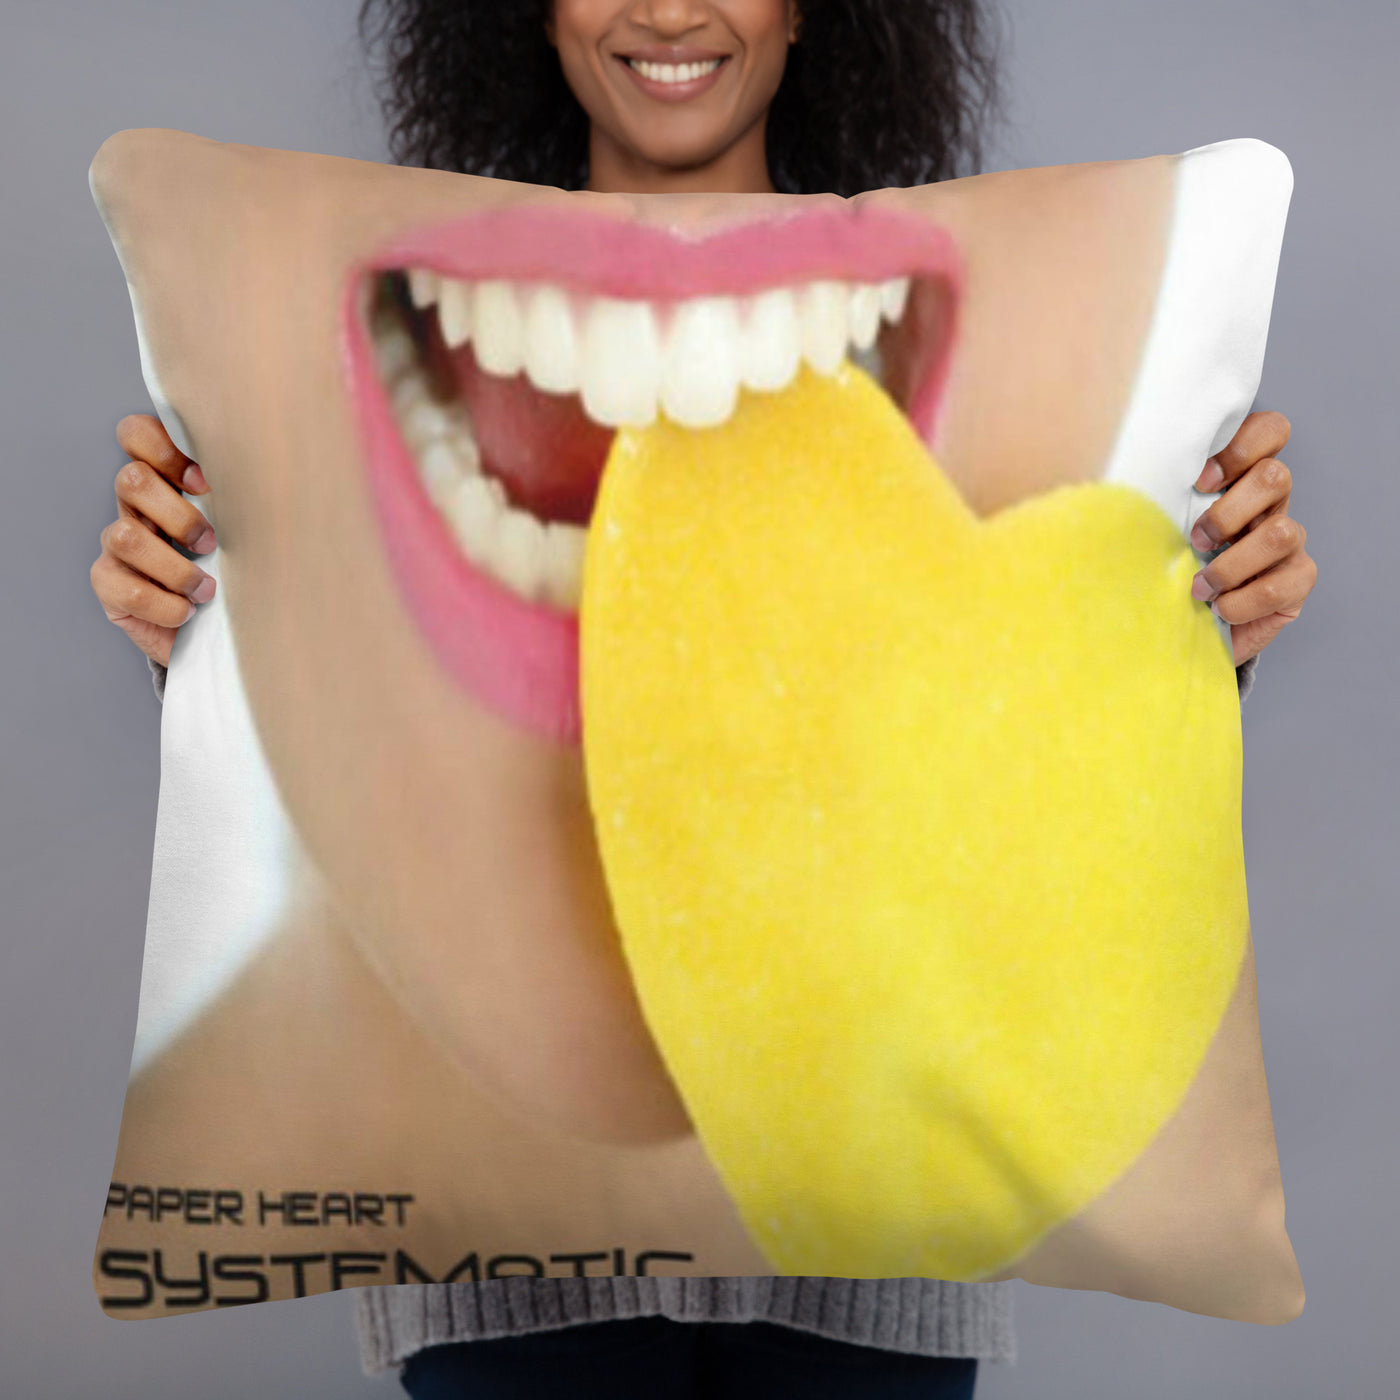 "Paper Heart's Systematic" Basic Pillow